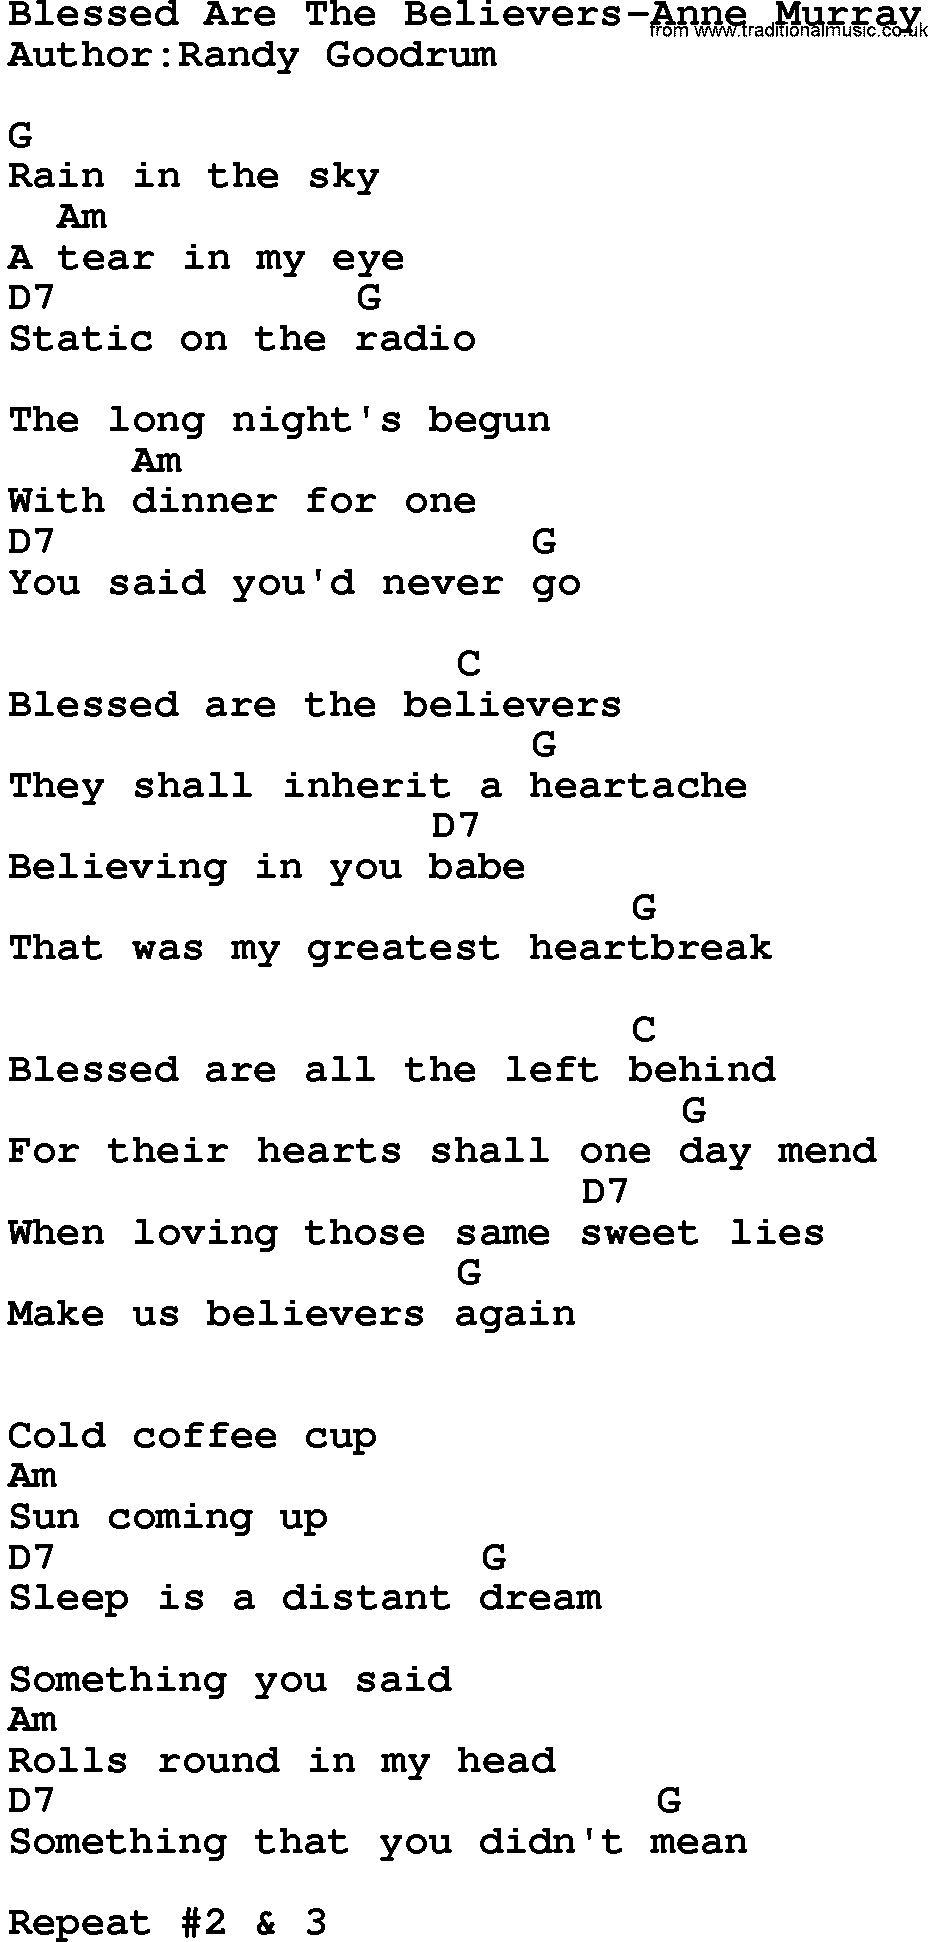 Country music song: Blessed Are The Believers-Anne Murray lyrics and chords